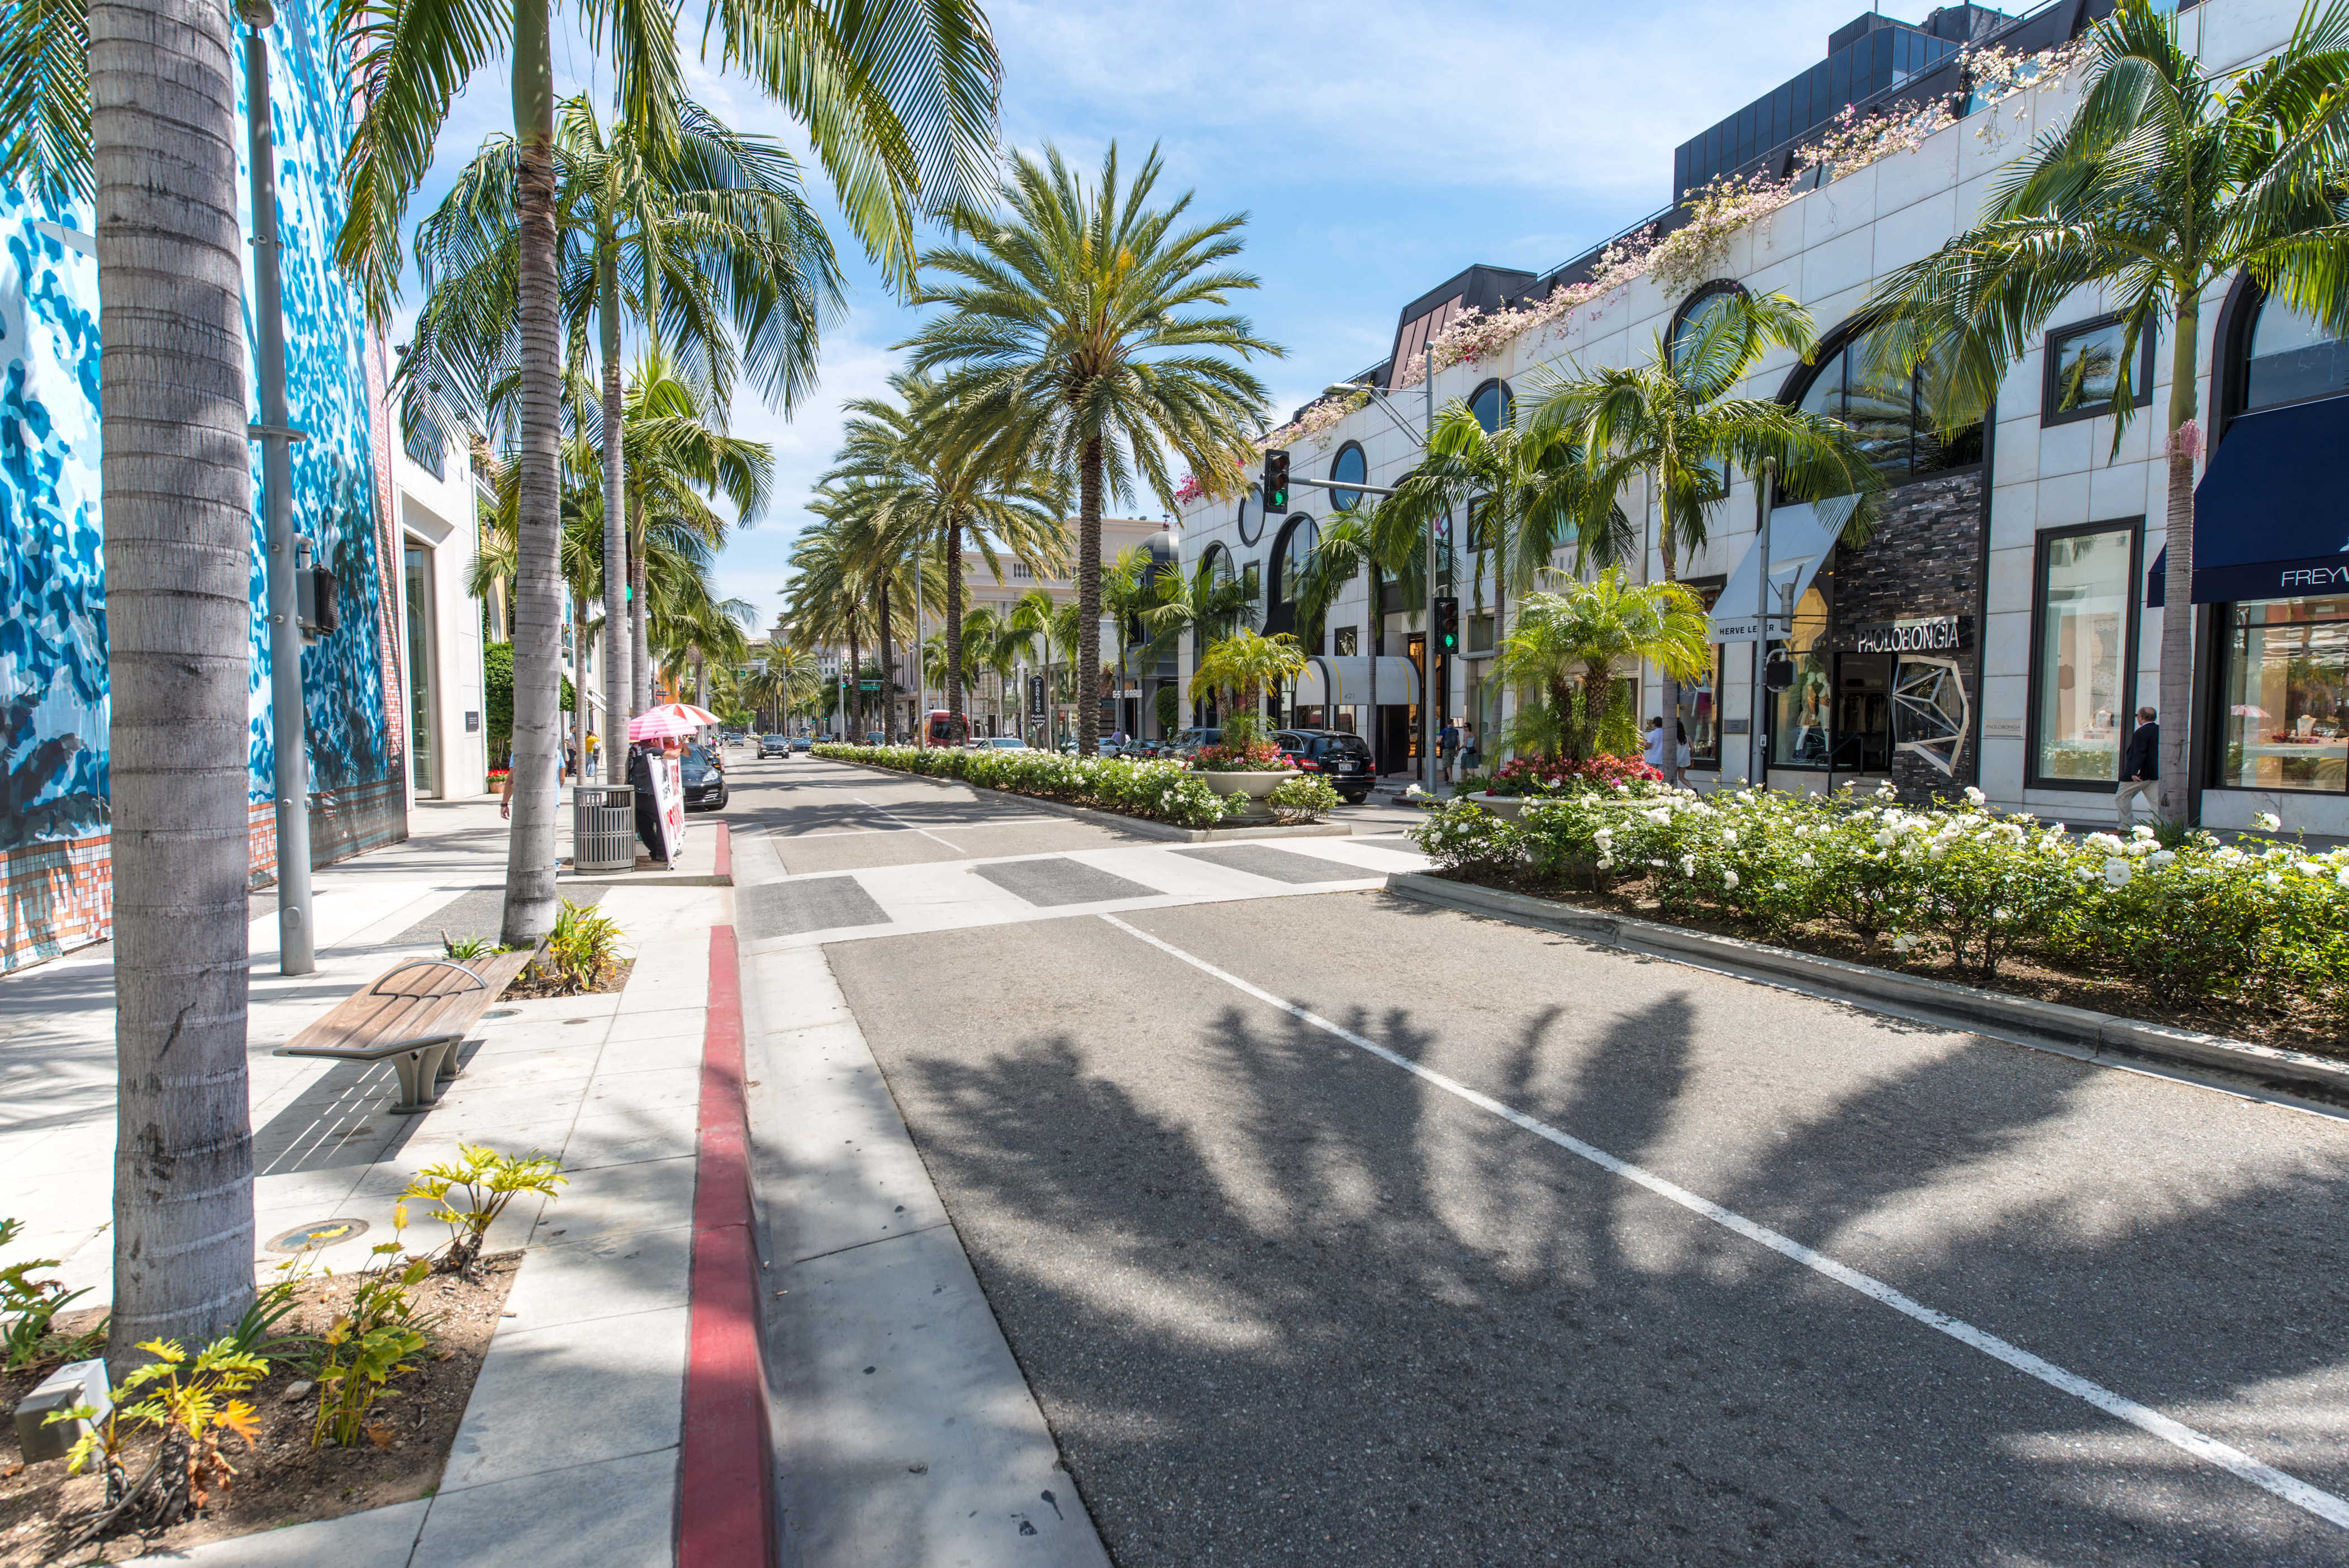 <p>For a more luxurious experience in LA, head over to Rodeo Drive. This famous street is where you’ll find some of the world’s best high-end fashion. Even if shopping isn’t on your travel agenda, all the designer boutiques and upscale stores are a great way to get a feel for the finer things in life.</p><p>Rodeo Drive is also a great place to <strong>catch sightings of your favorite celebrities</strong>, so its always well-worth the visit.</p>